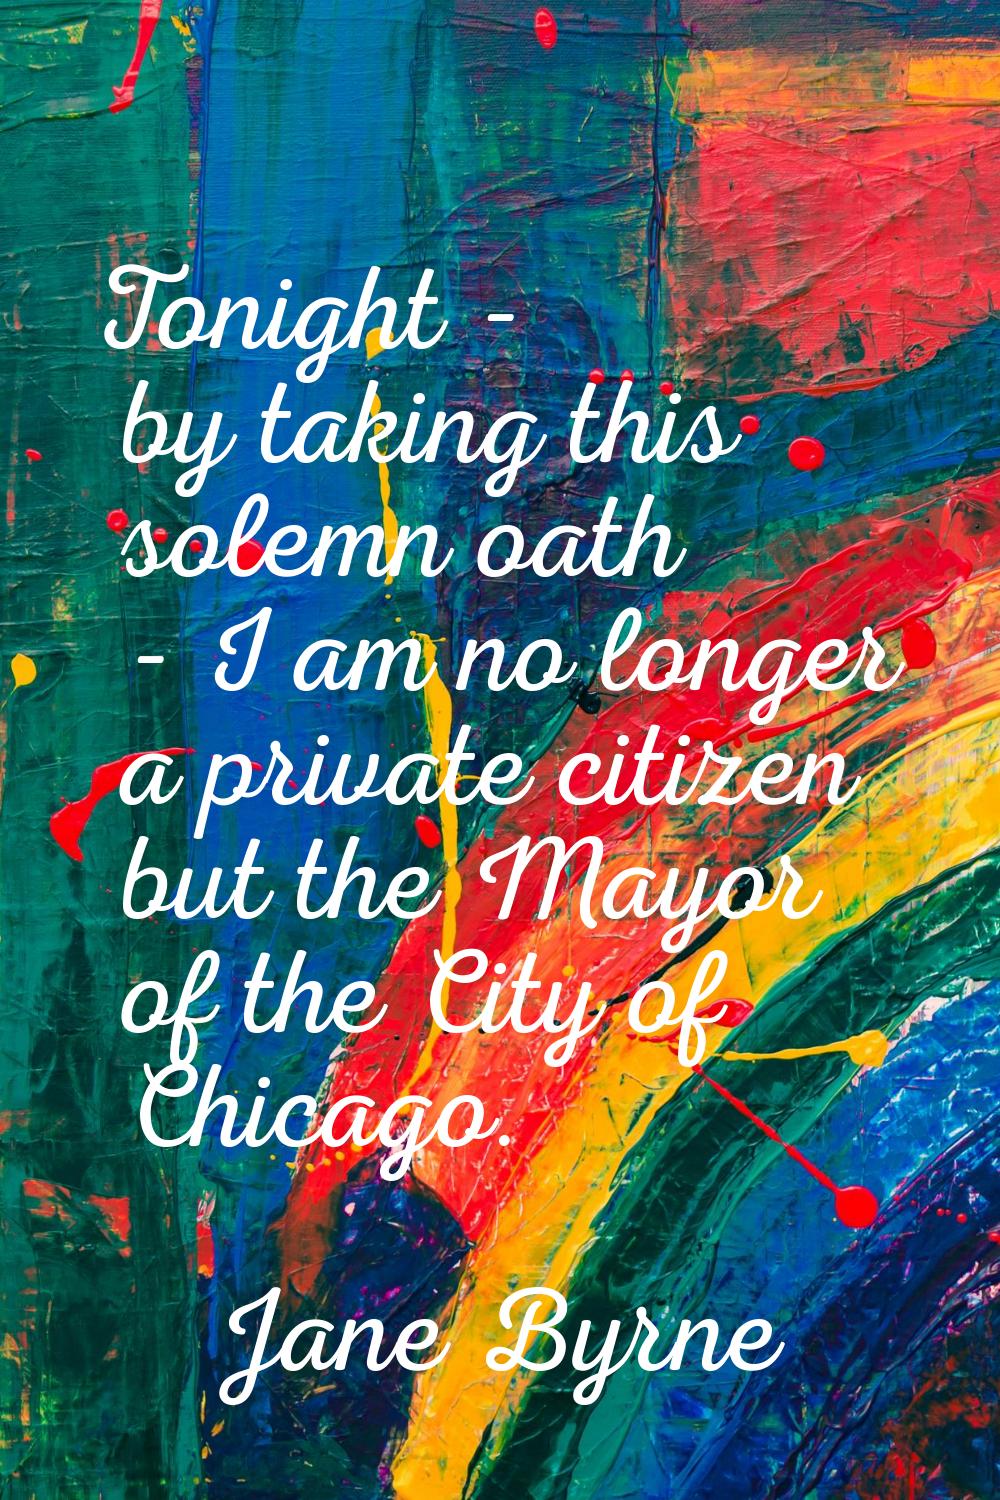 Tonight - by taking this solemn oath - I am no longer a private citizen but the Mayor of the City o